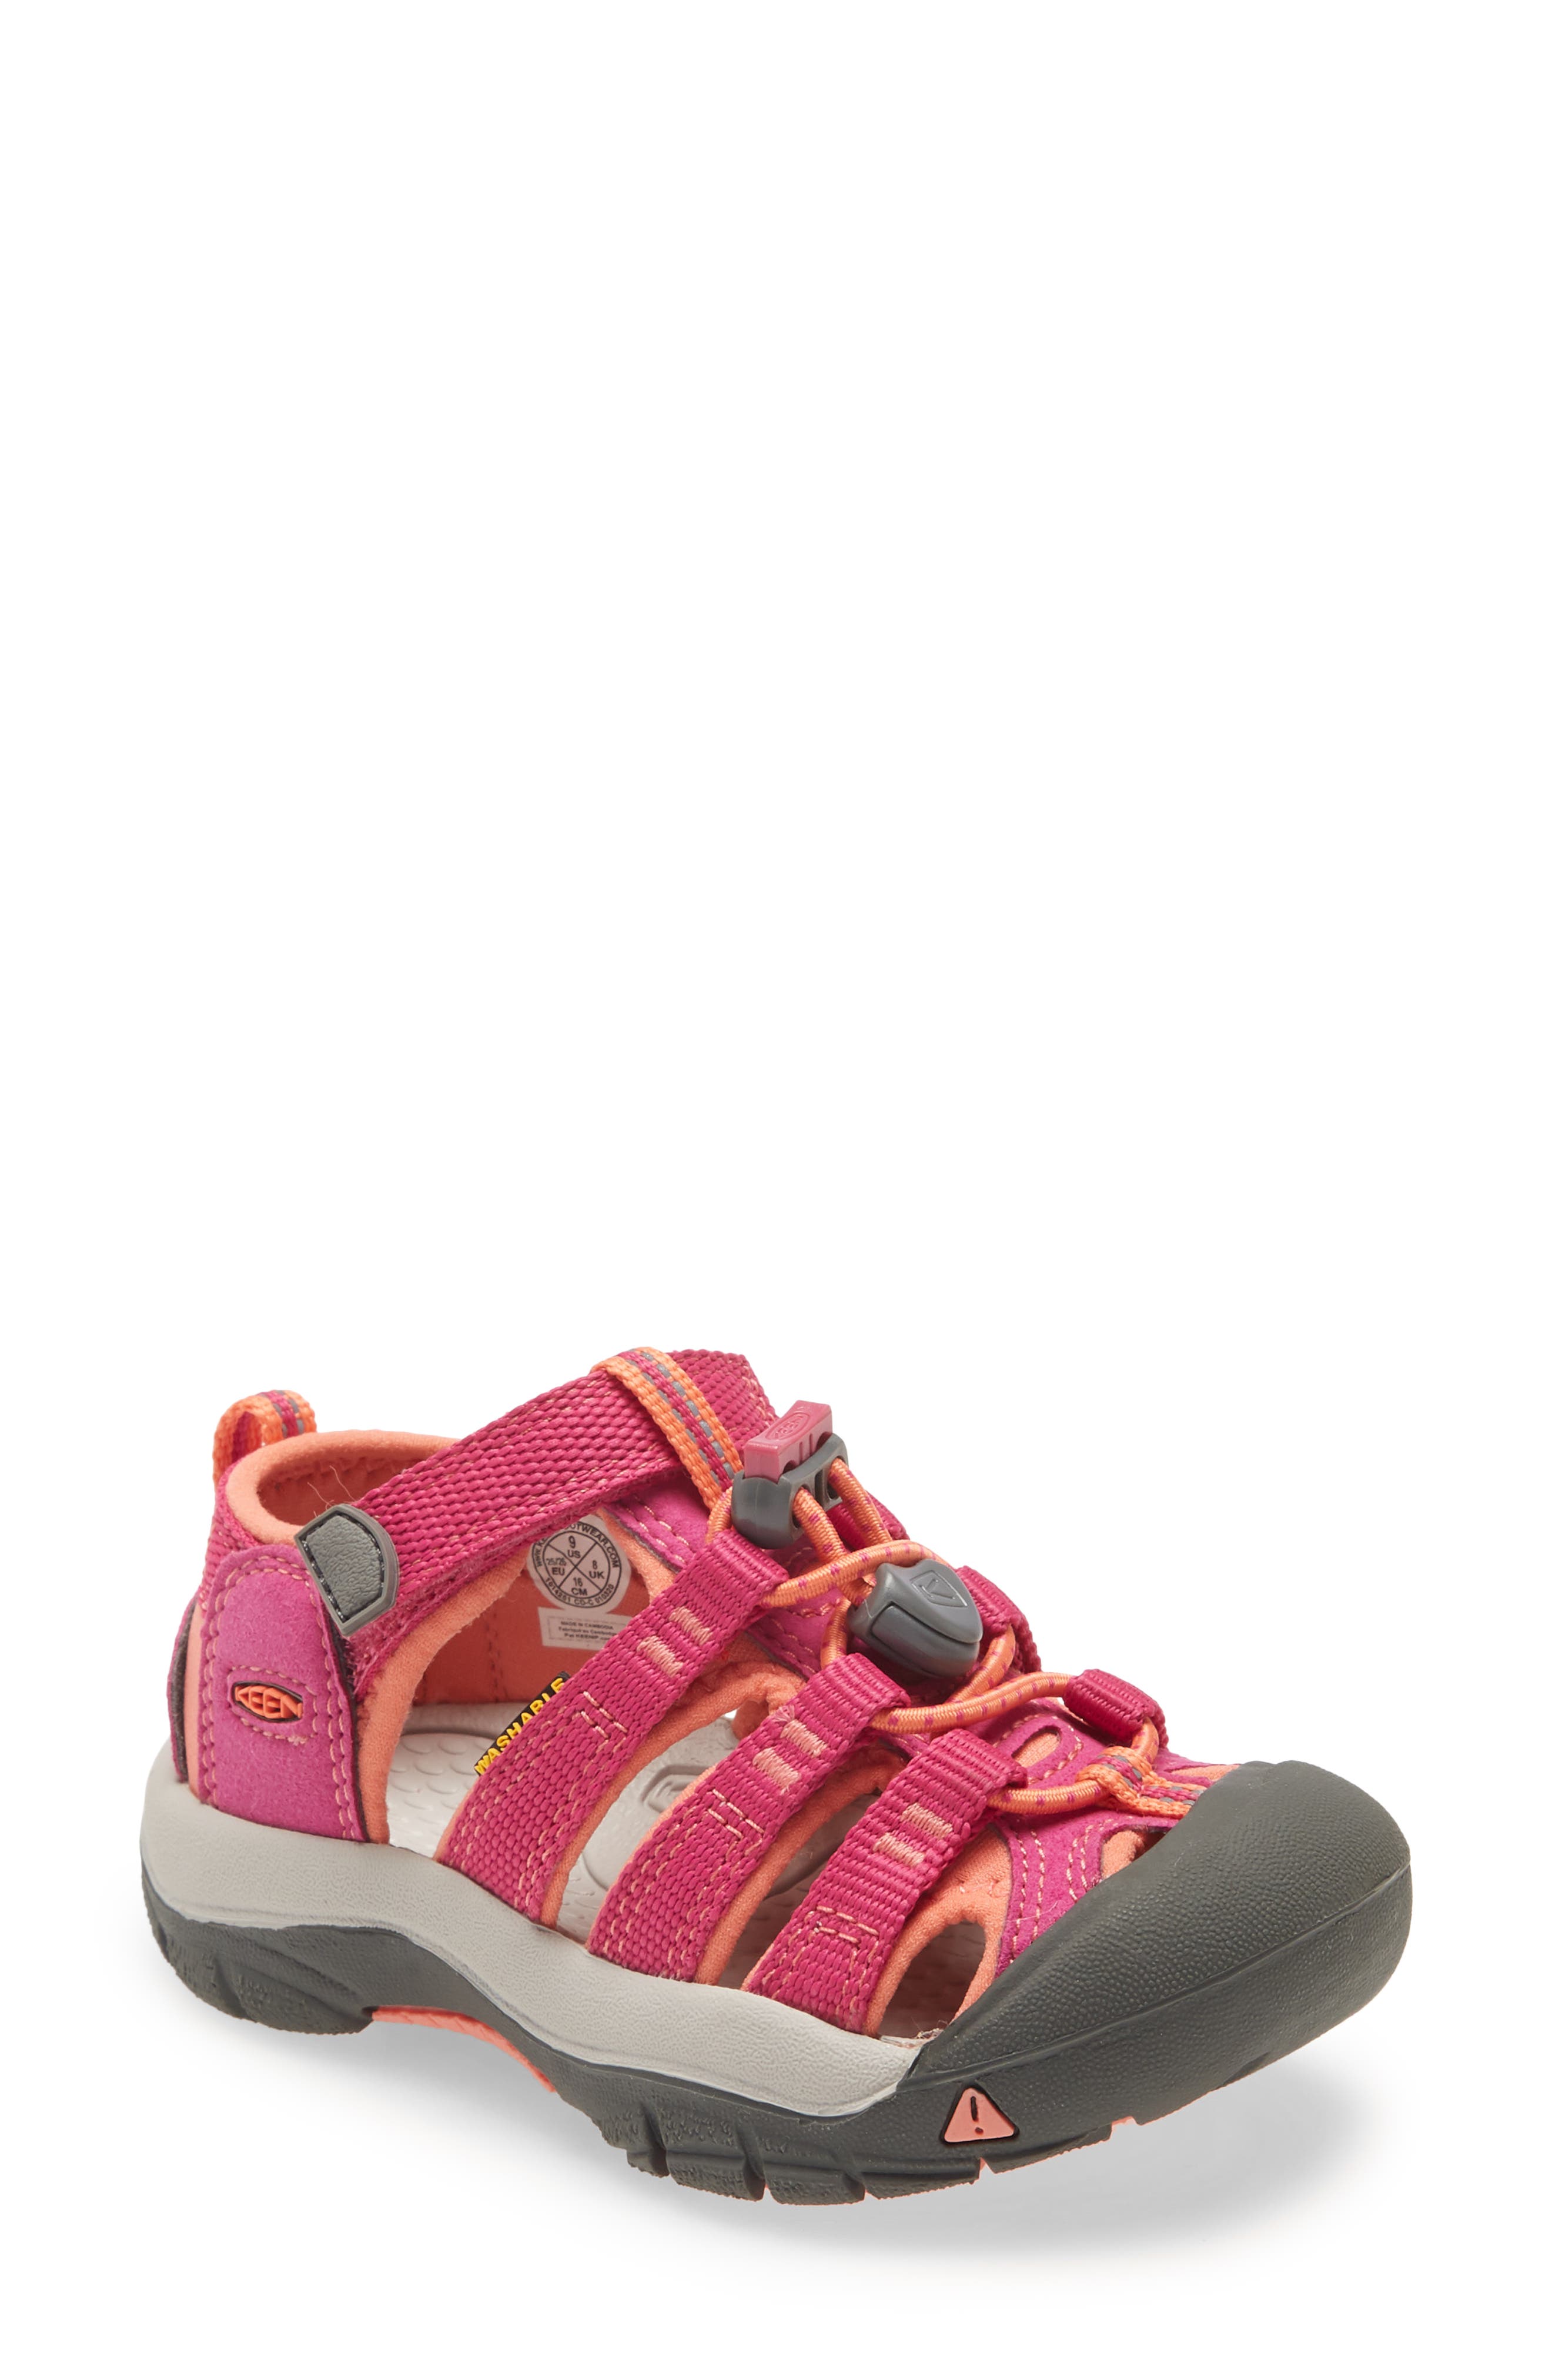 Toddler Boys' Keen Shoes (Sizes 7.5-12)